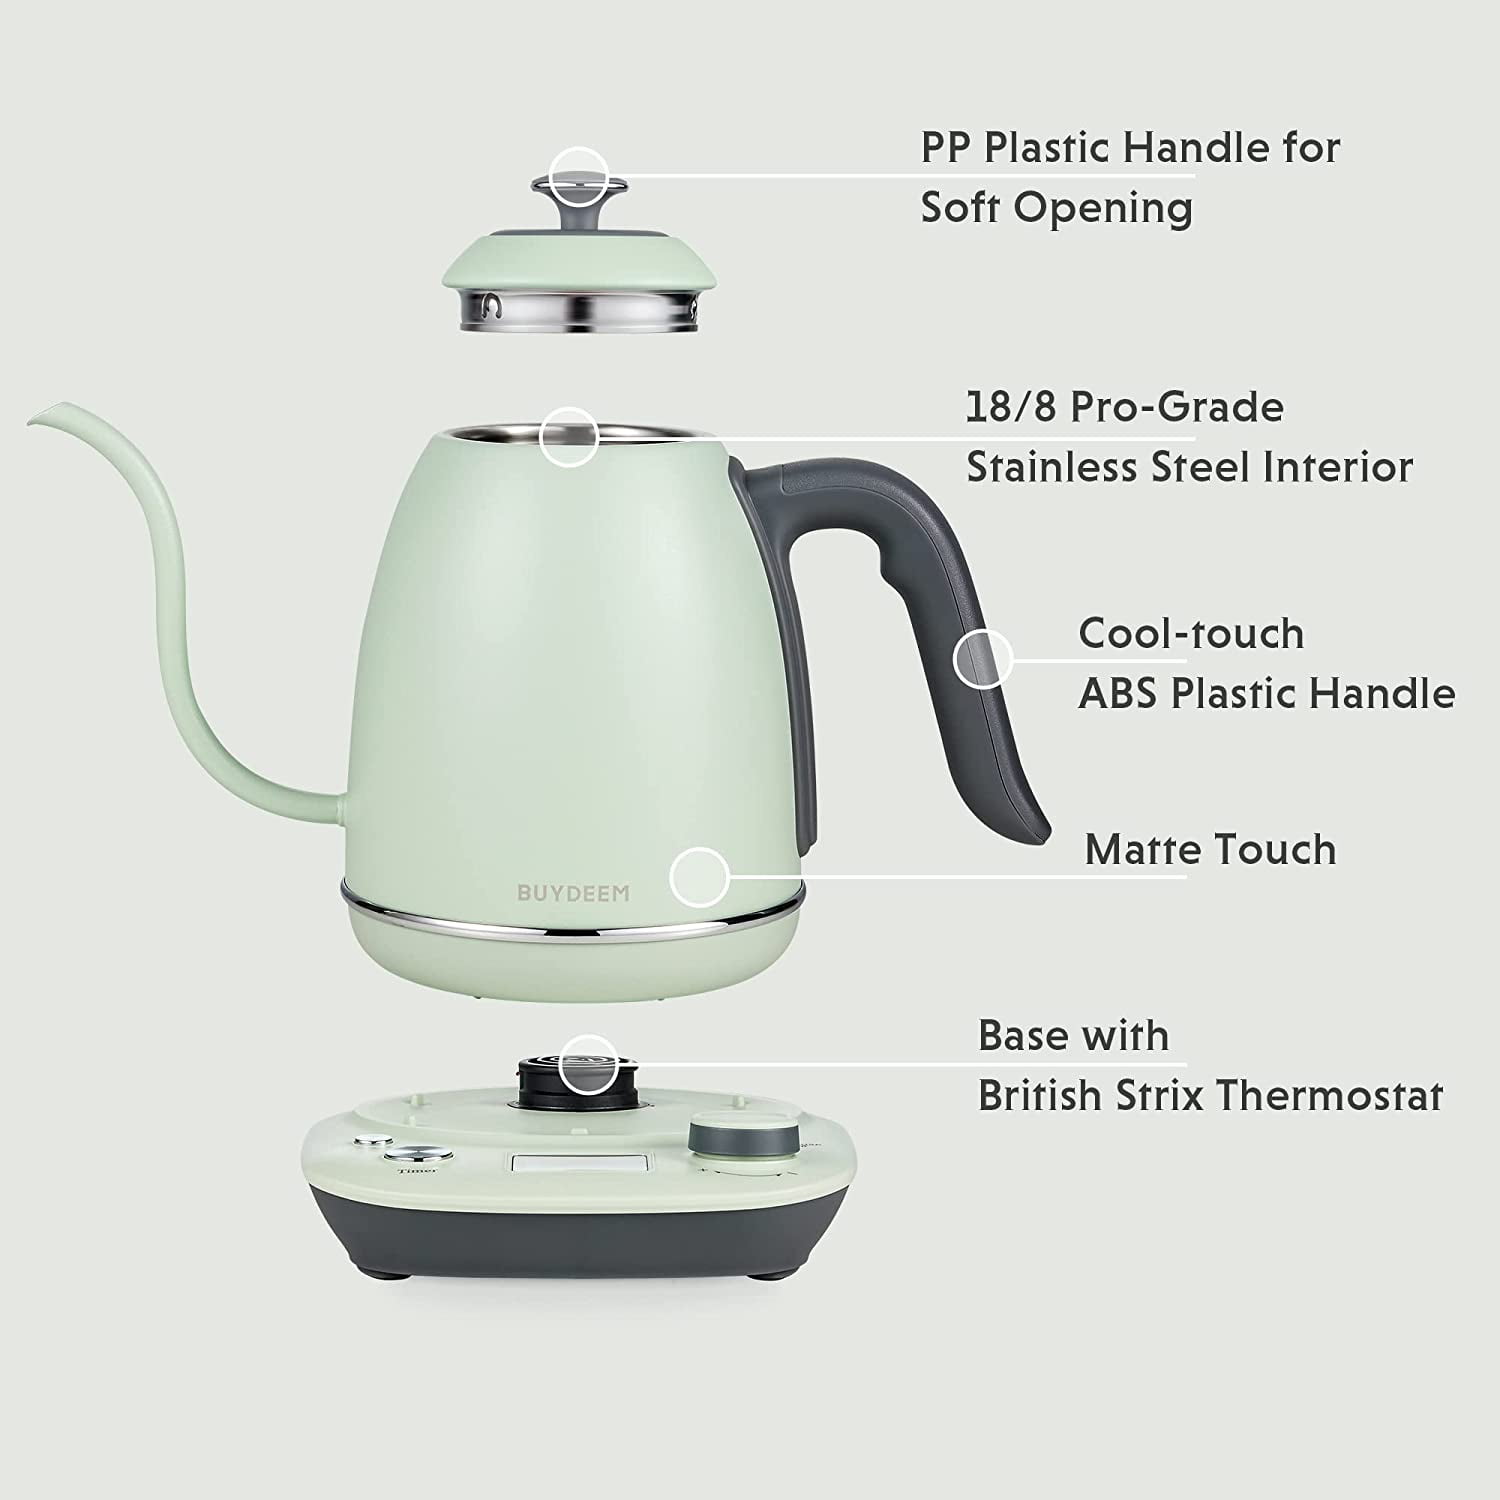 VEVOR Electric Gooseneck Kettle 1L Temperature Control Pour Over Coffee Kettle with 5 Variable Presets 304 Food Grade Stainless Steel Hot Water Tea